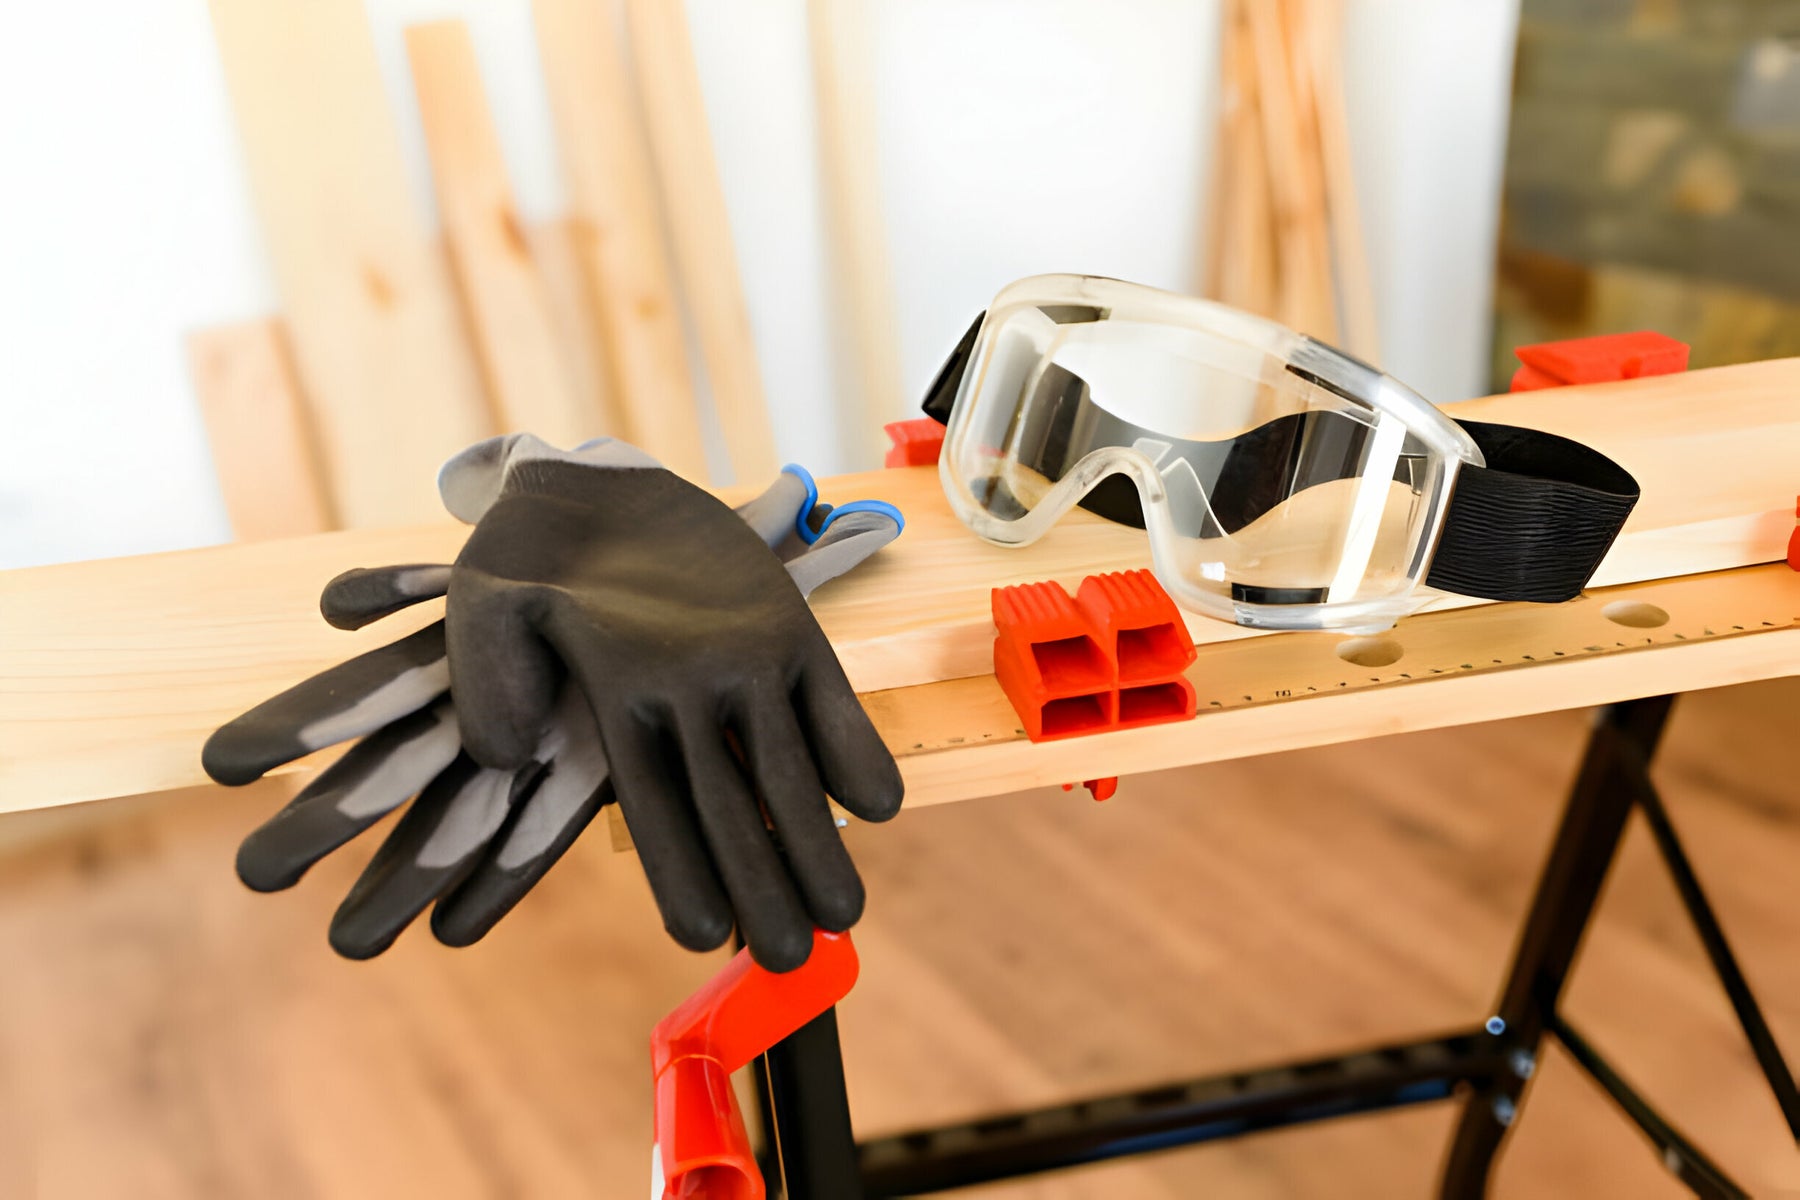 Choosing the Right Safety Gear for Specific DIY Tasks